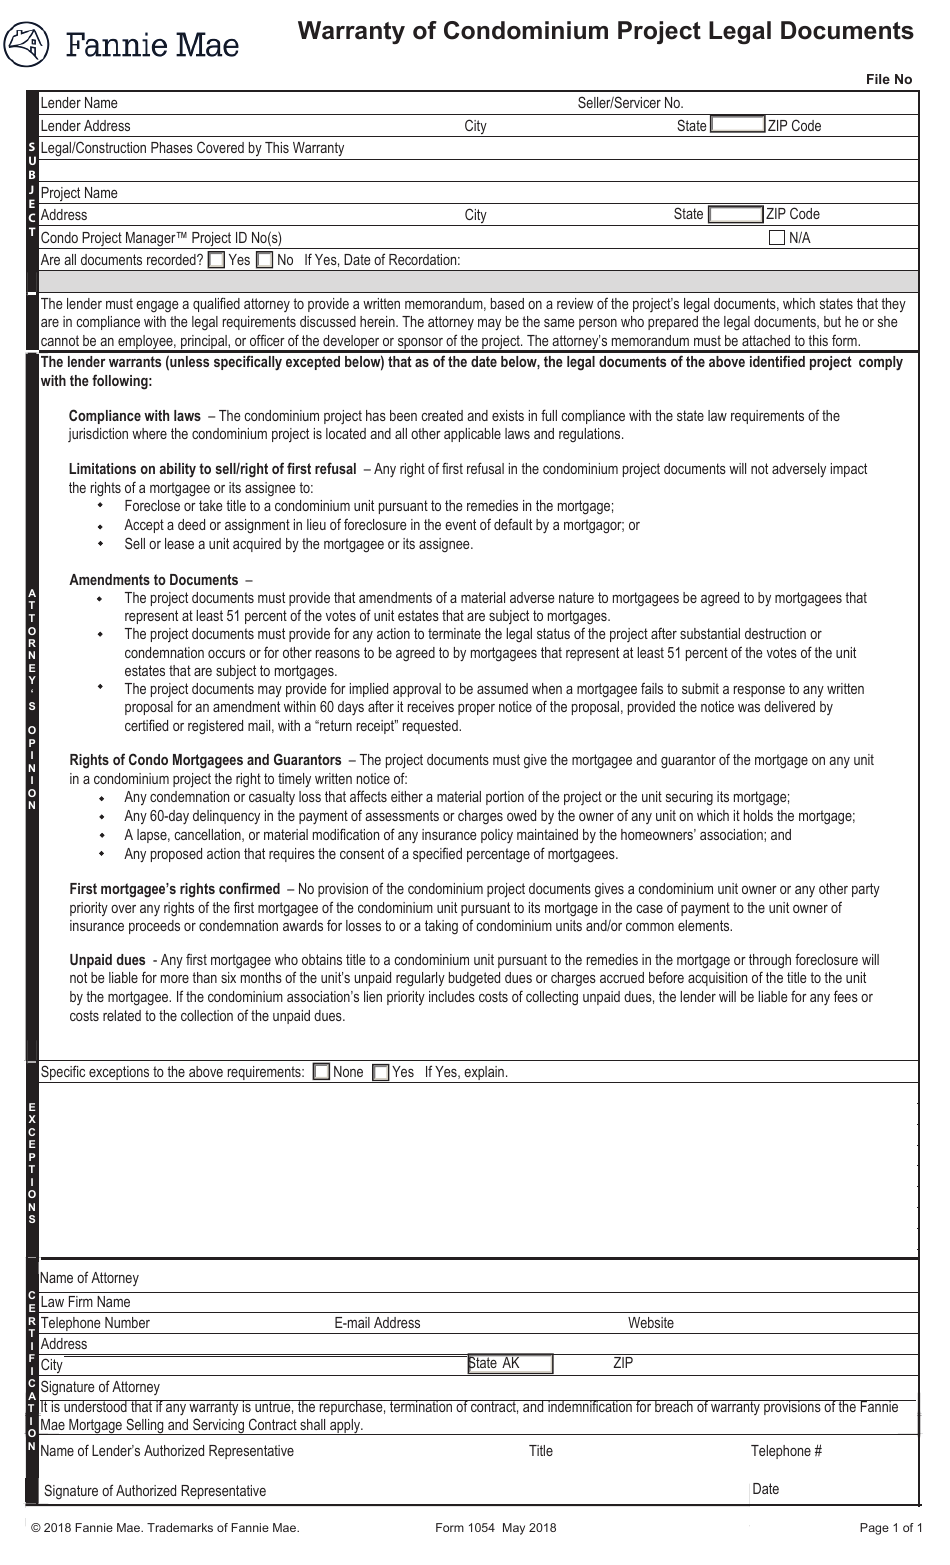 Form 1054 Warranty of Condominium Project Legal Documents, Page 1